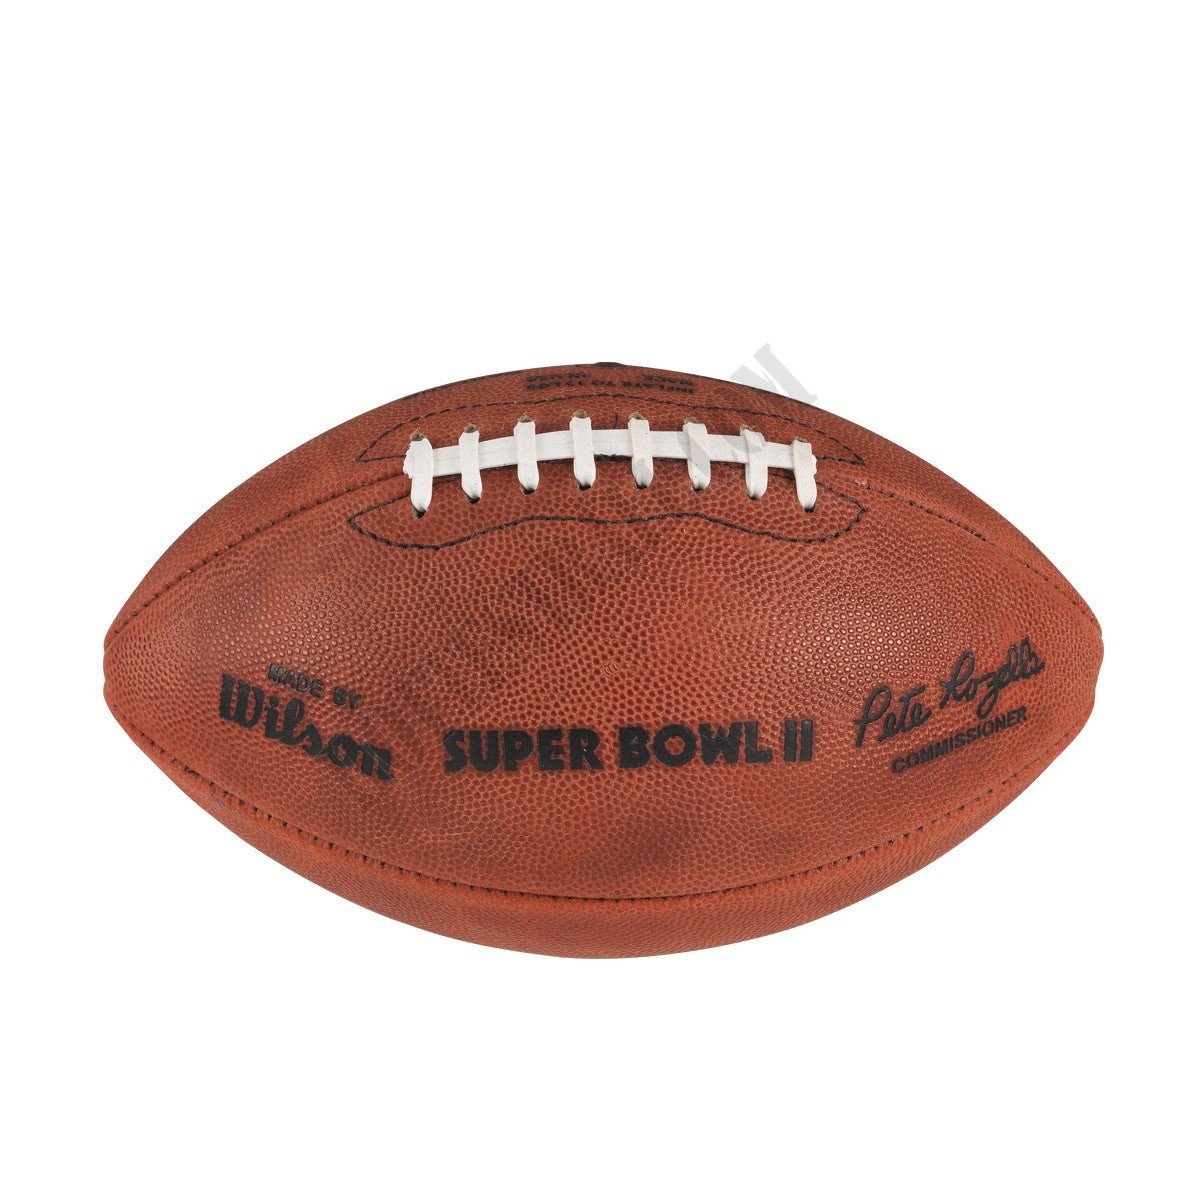 Super Bowl II Game Football - Green Bay Packers ● Wilson Promotions - -0